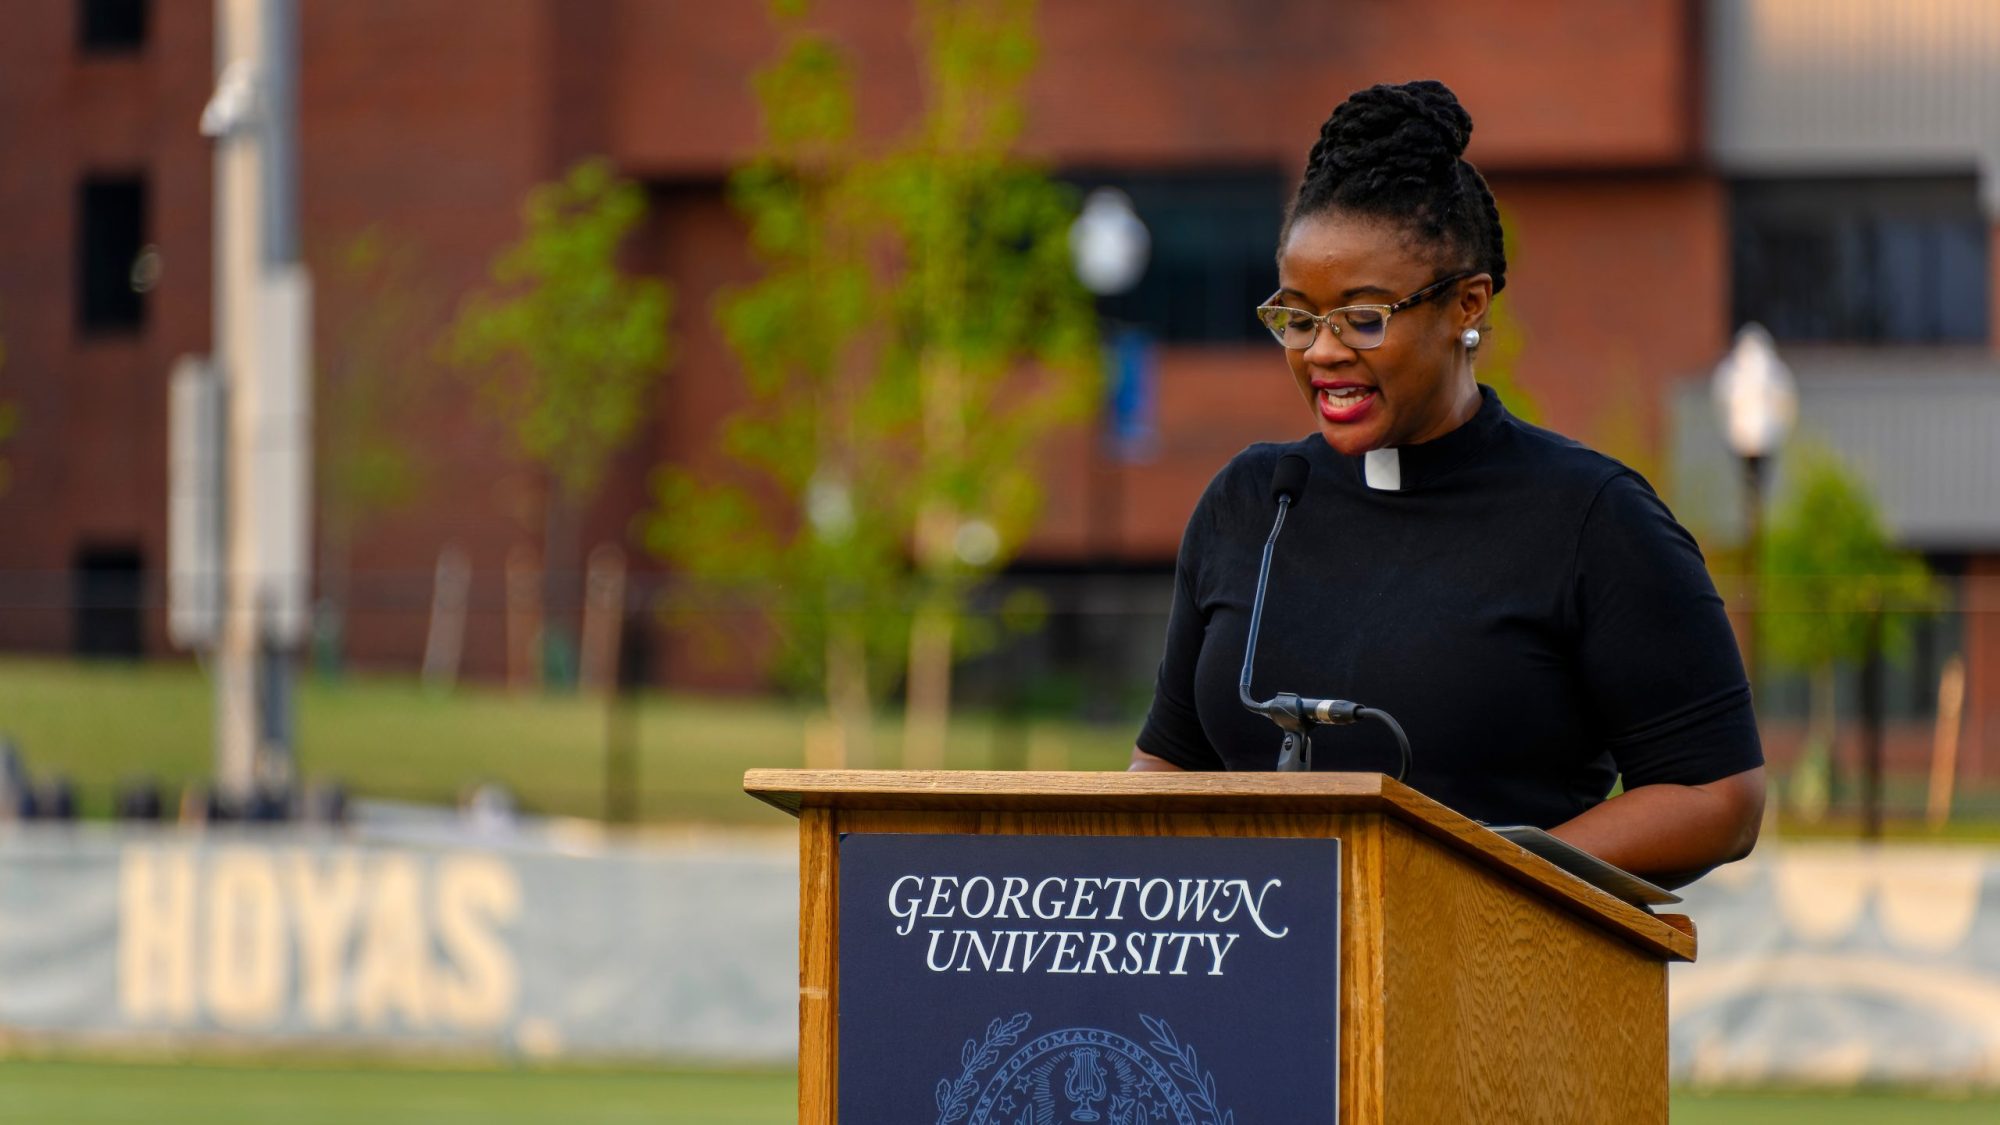 Rev. Ebony Grisom wears a collar and speaks from behind a podium in a field